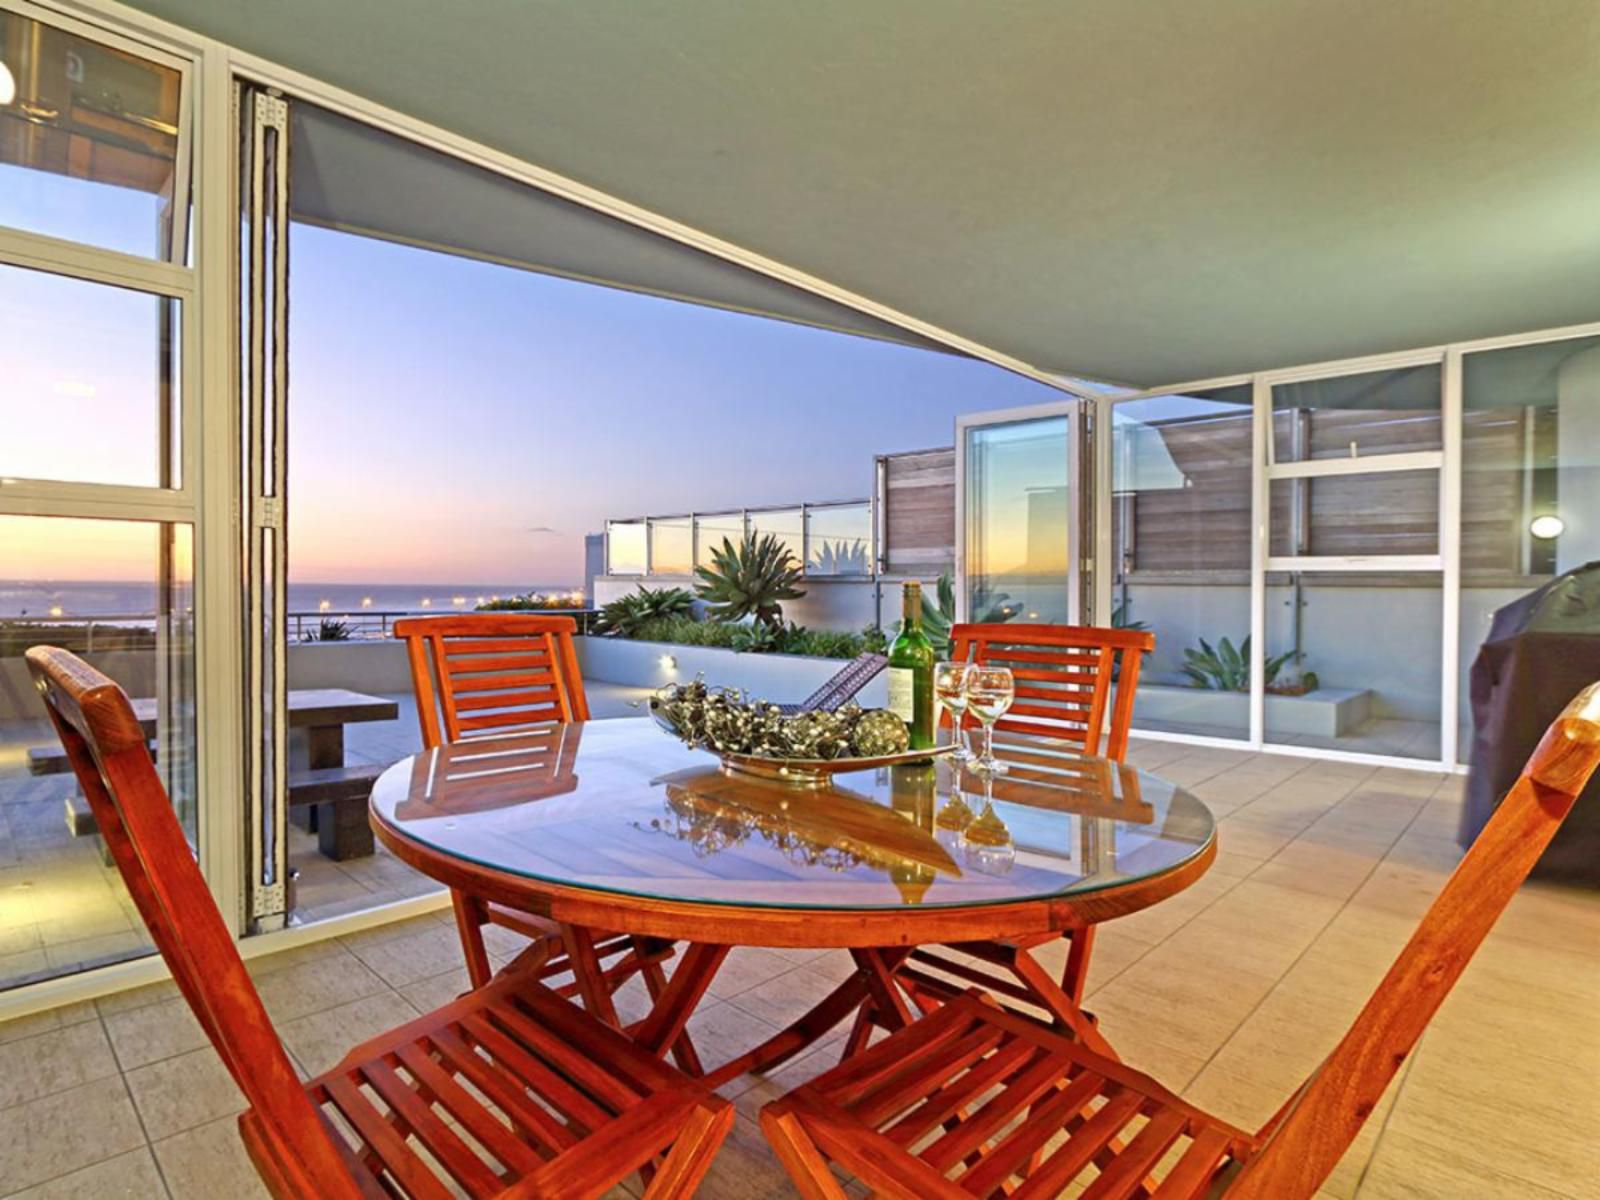 Horizon Bay 103 By Hostagents Bloubergstrand Blouberg Western Cape South Africa 